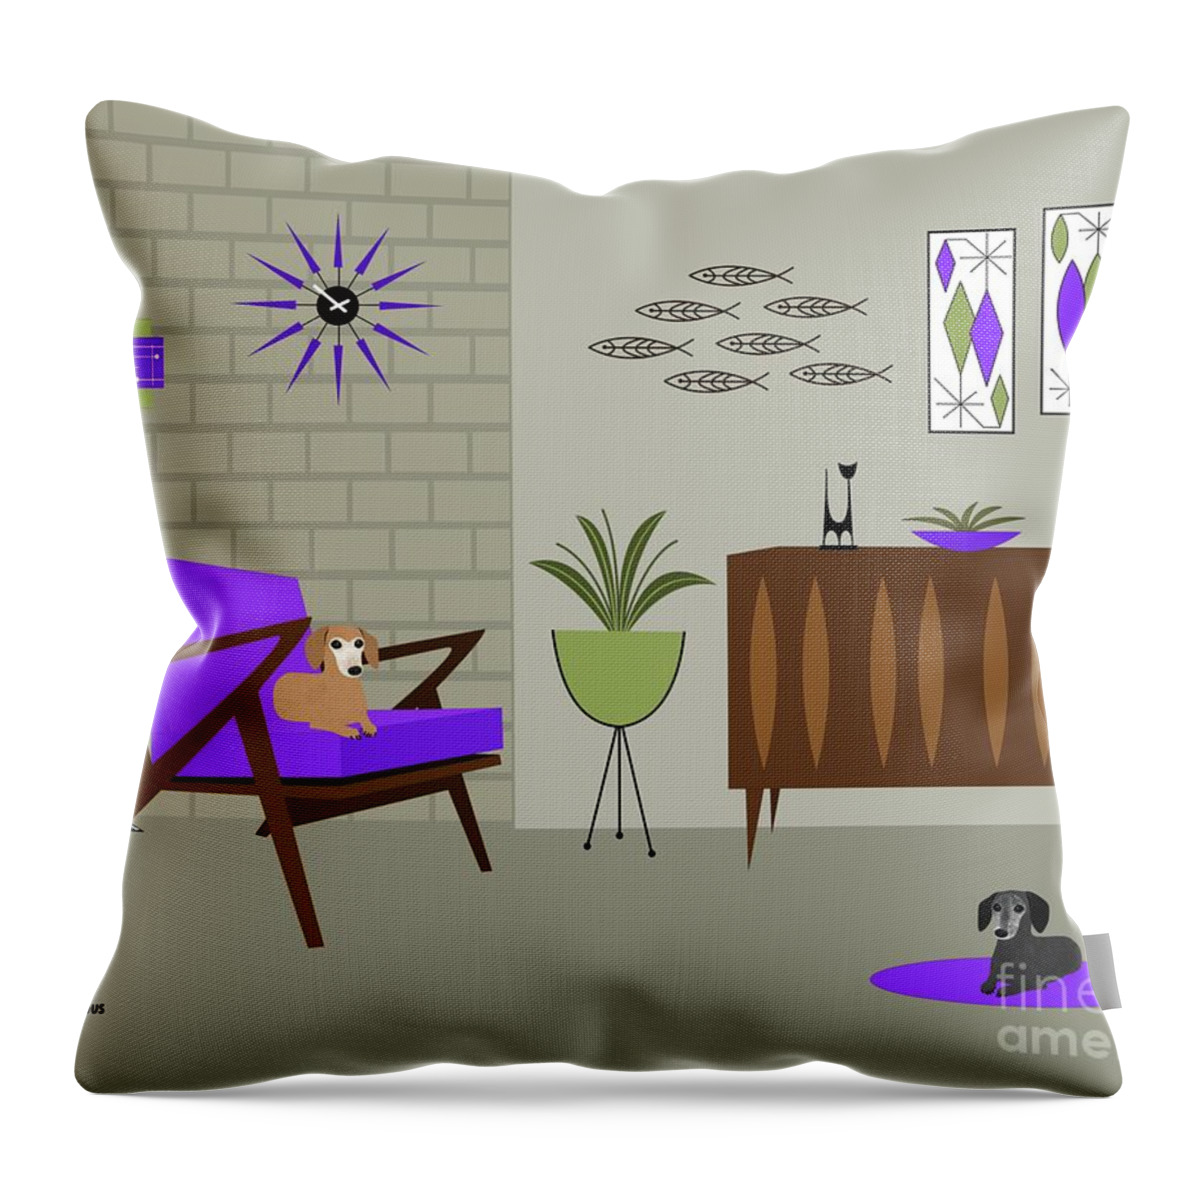 Mid Century Modern Dachshunds Throw Pillow featuring the digital art Two Mid Century Dachshunds in Purple Room by Donna Mibus